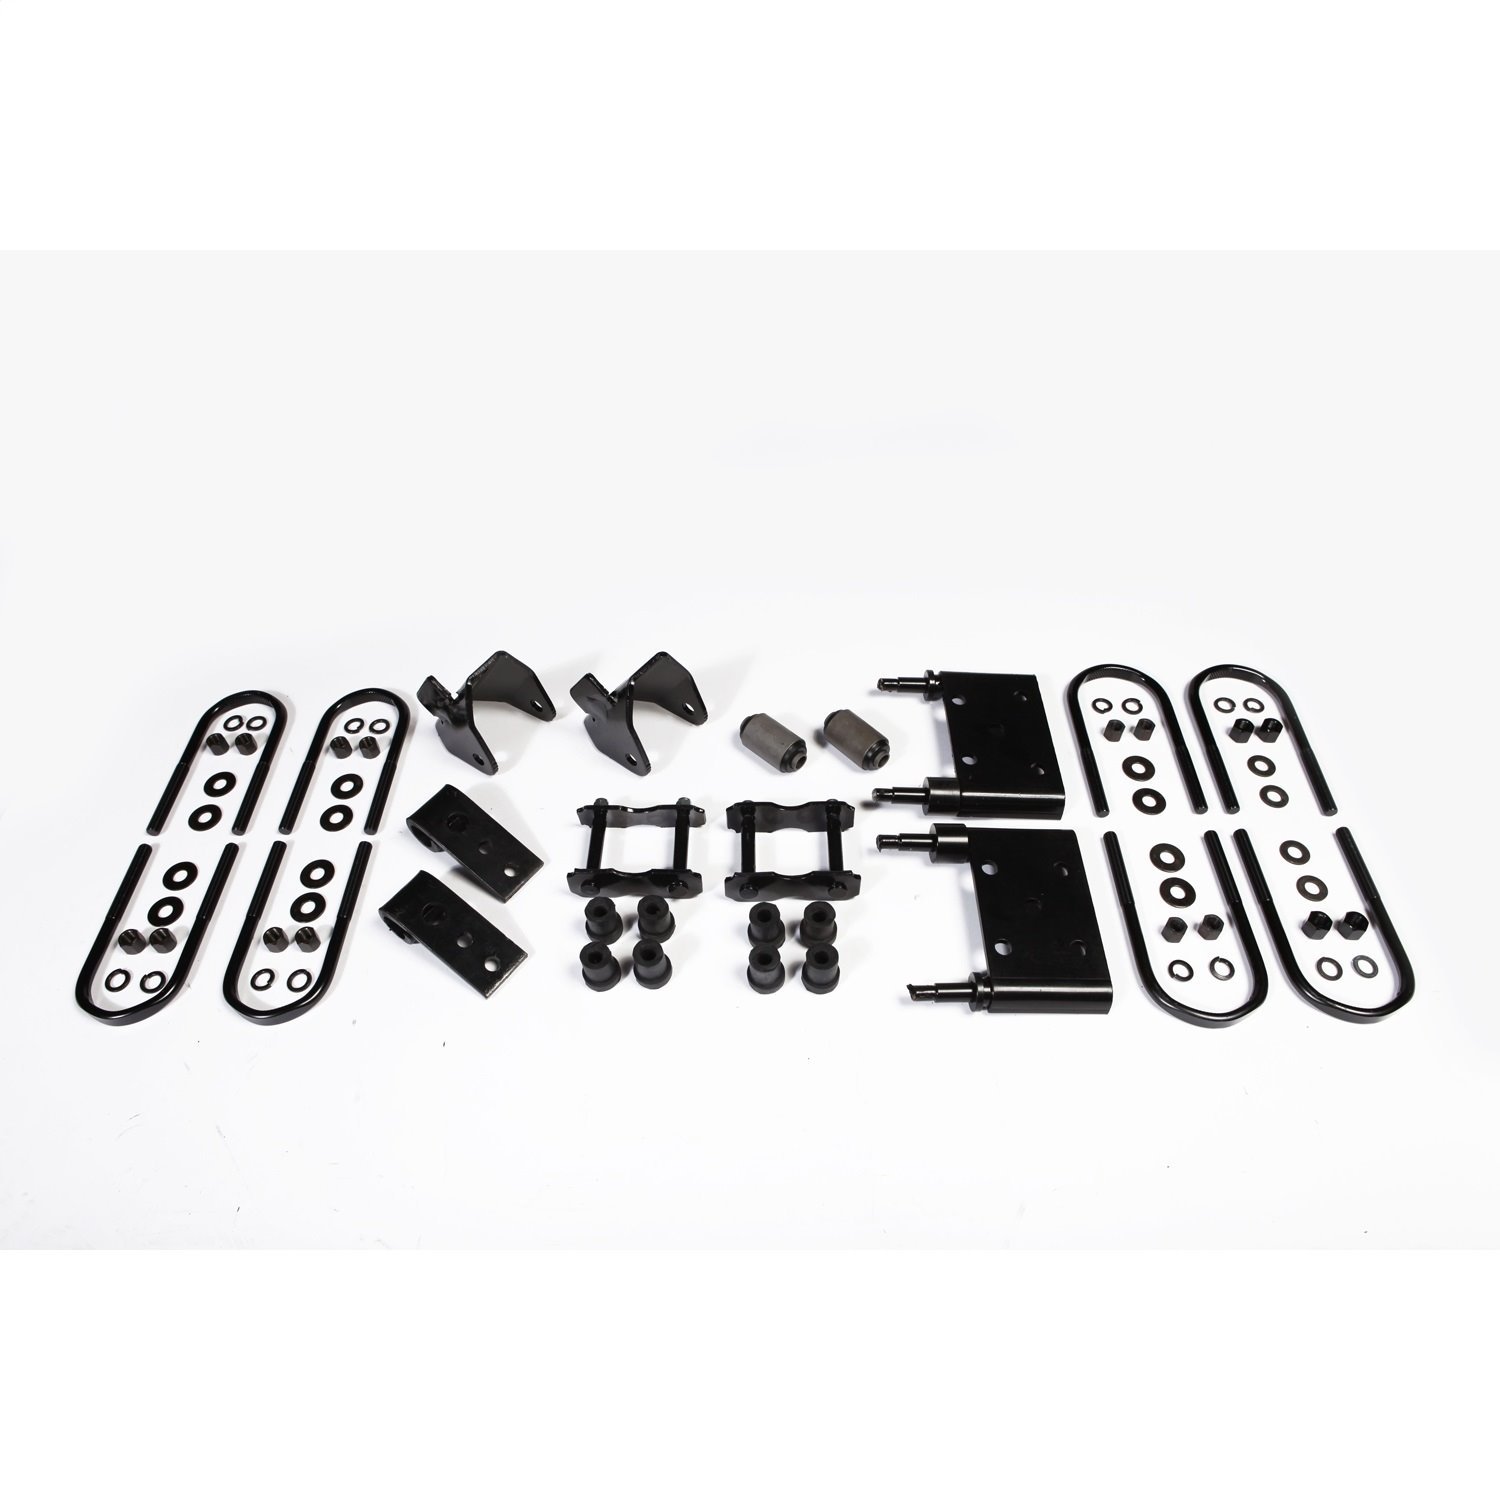 This front leaf spring mounting kit from Omix-ADA fits 76-83 Jeep CJ5 76-86 CJ7 and 81-86 CJ8.